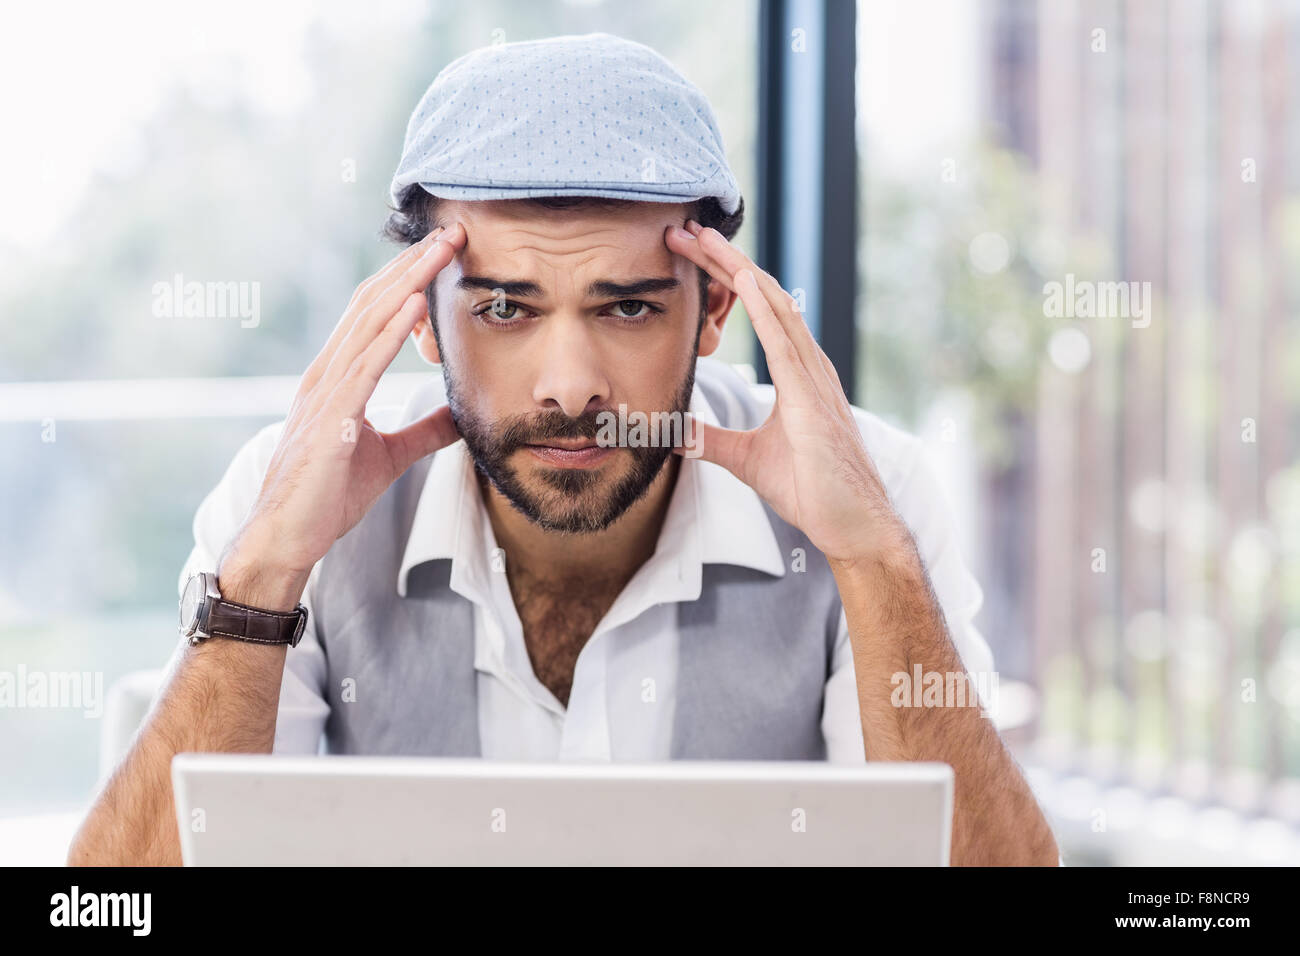 Worried man with hands on his face looking at the camera Stock Photo